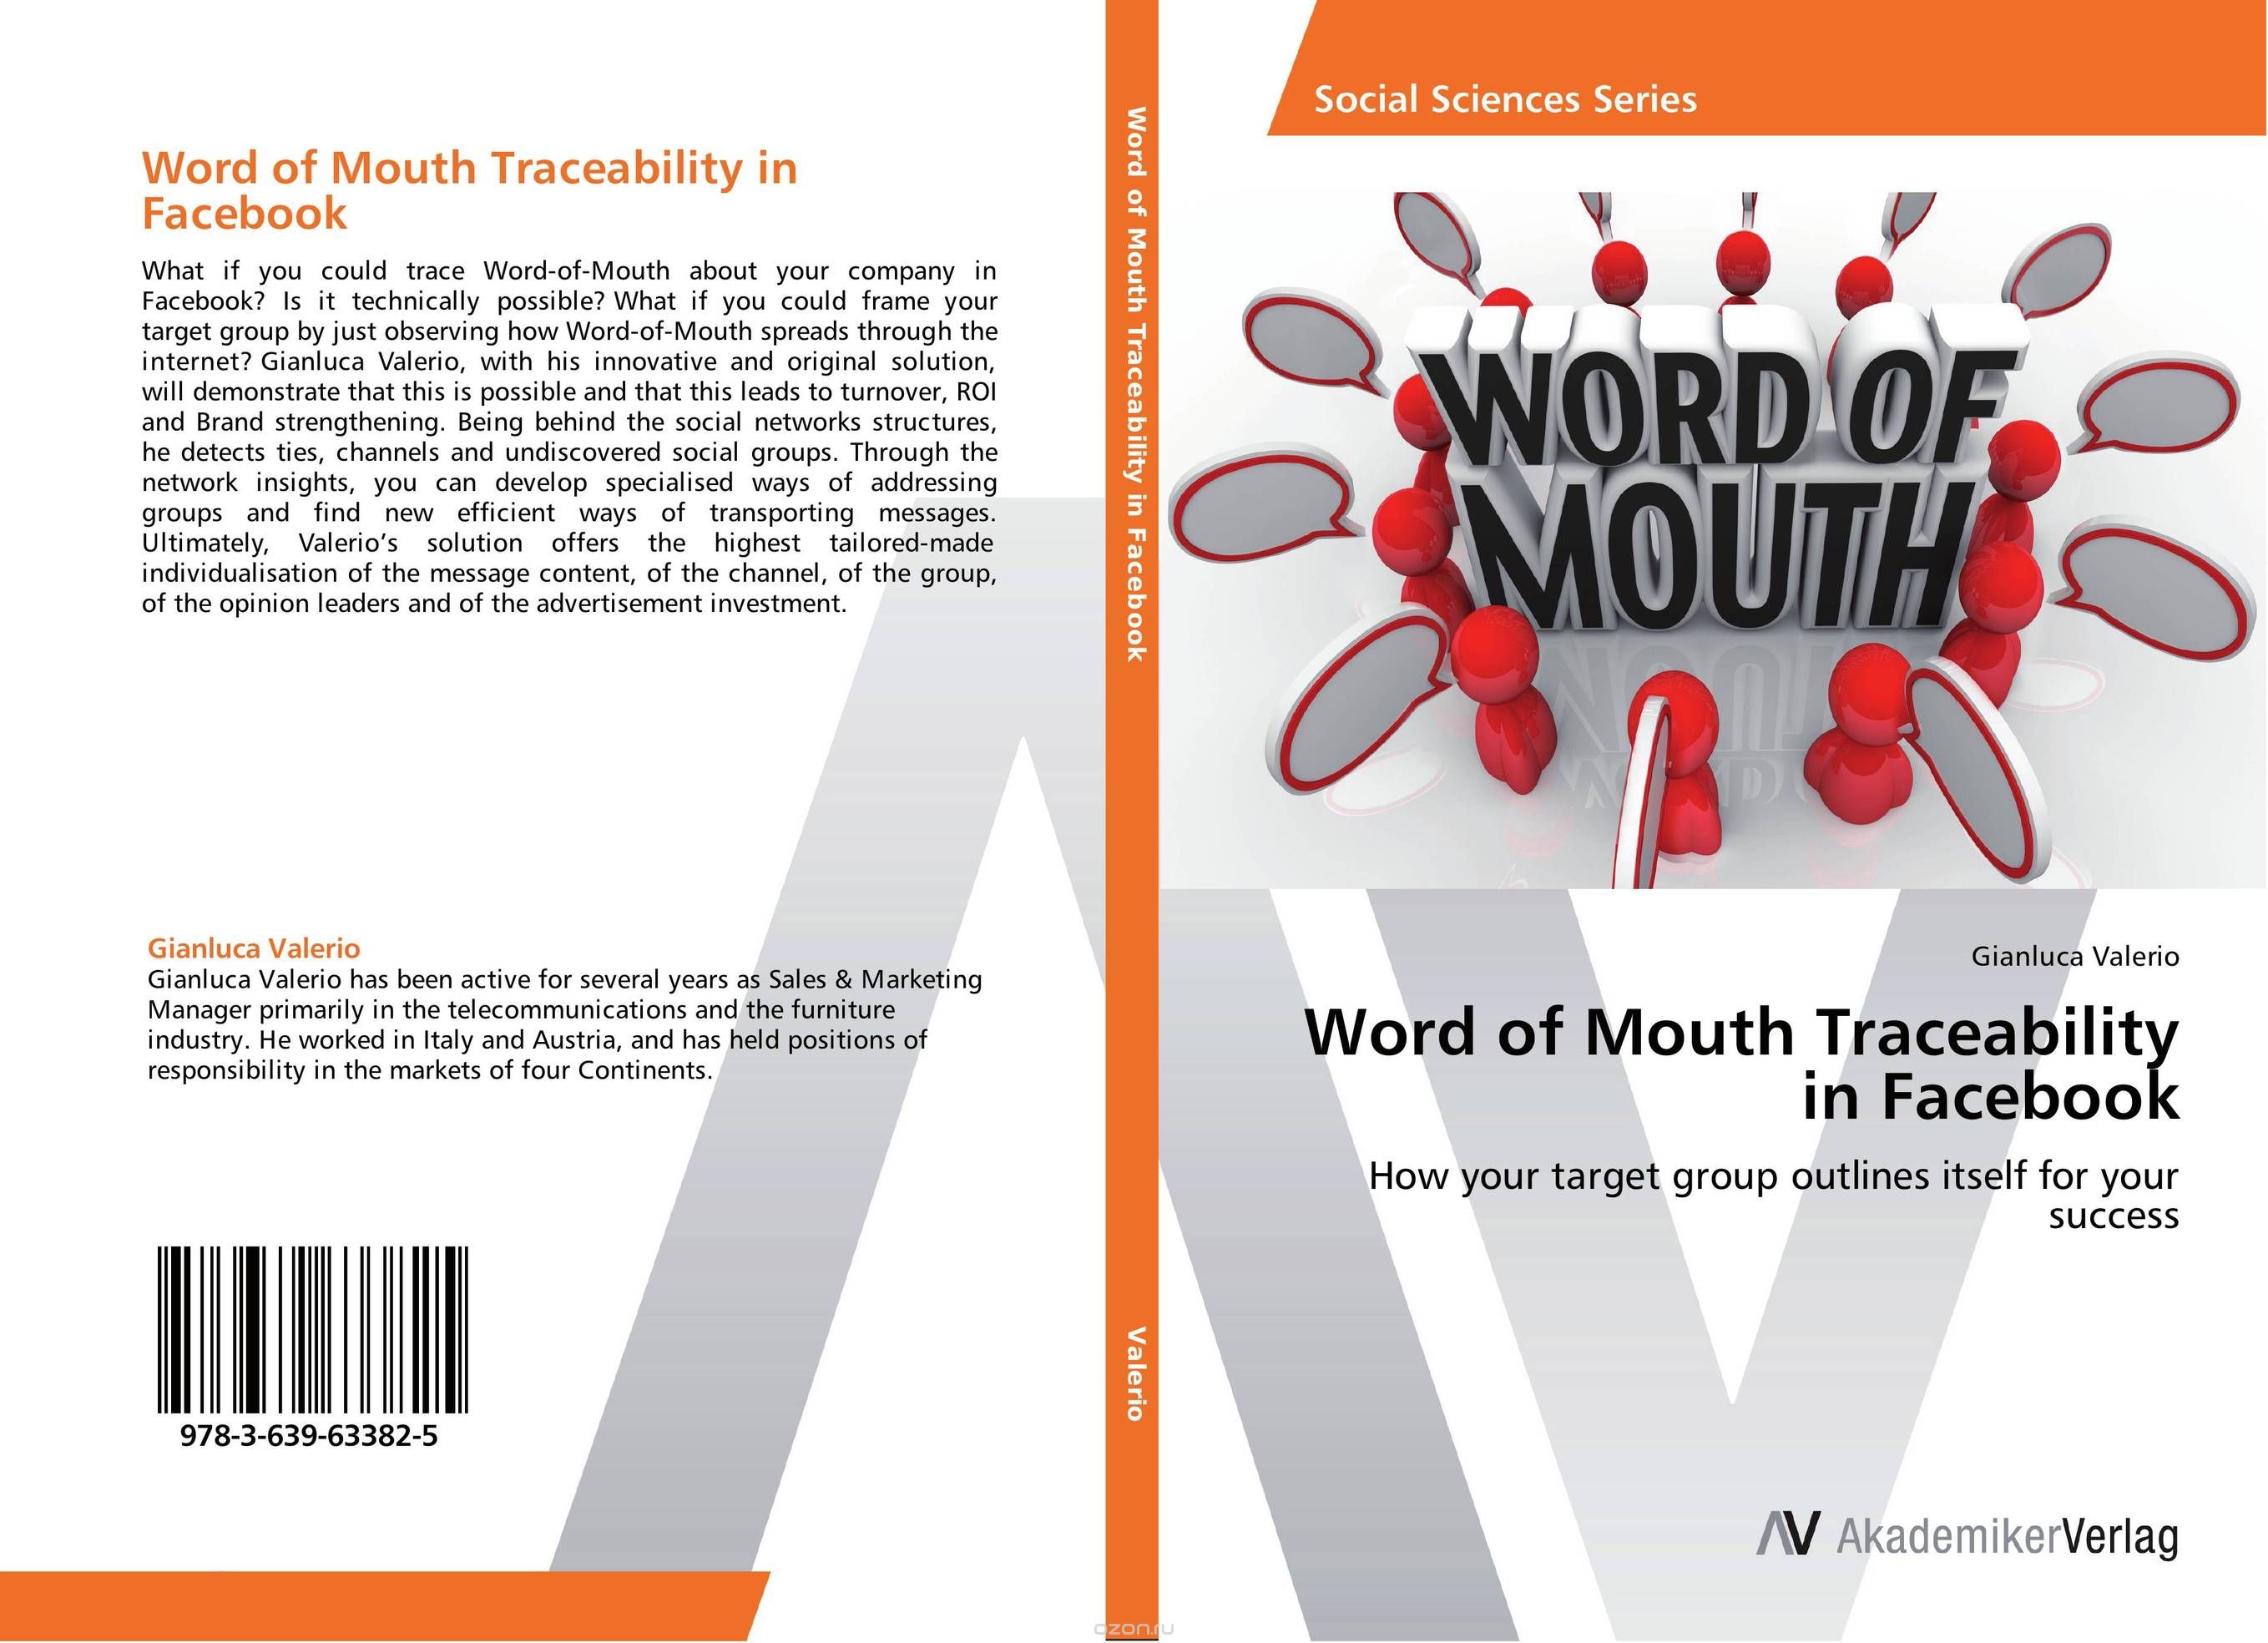 Скачать книгу "Word of Mouth Traceability in Facebook"